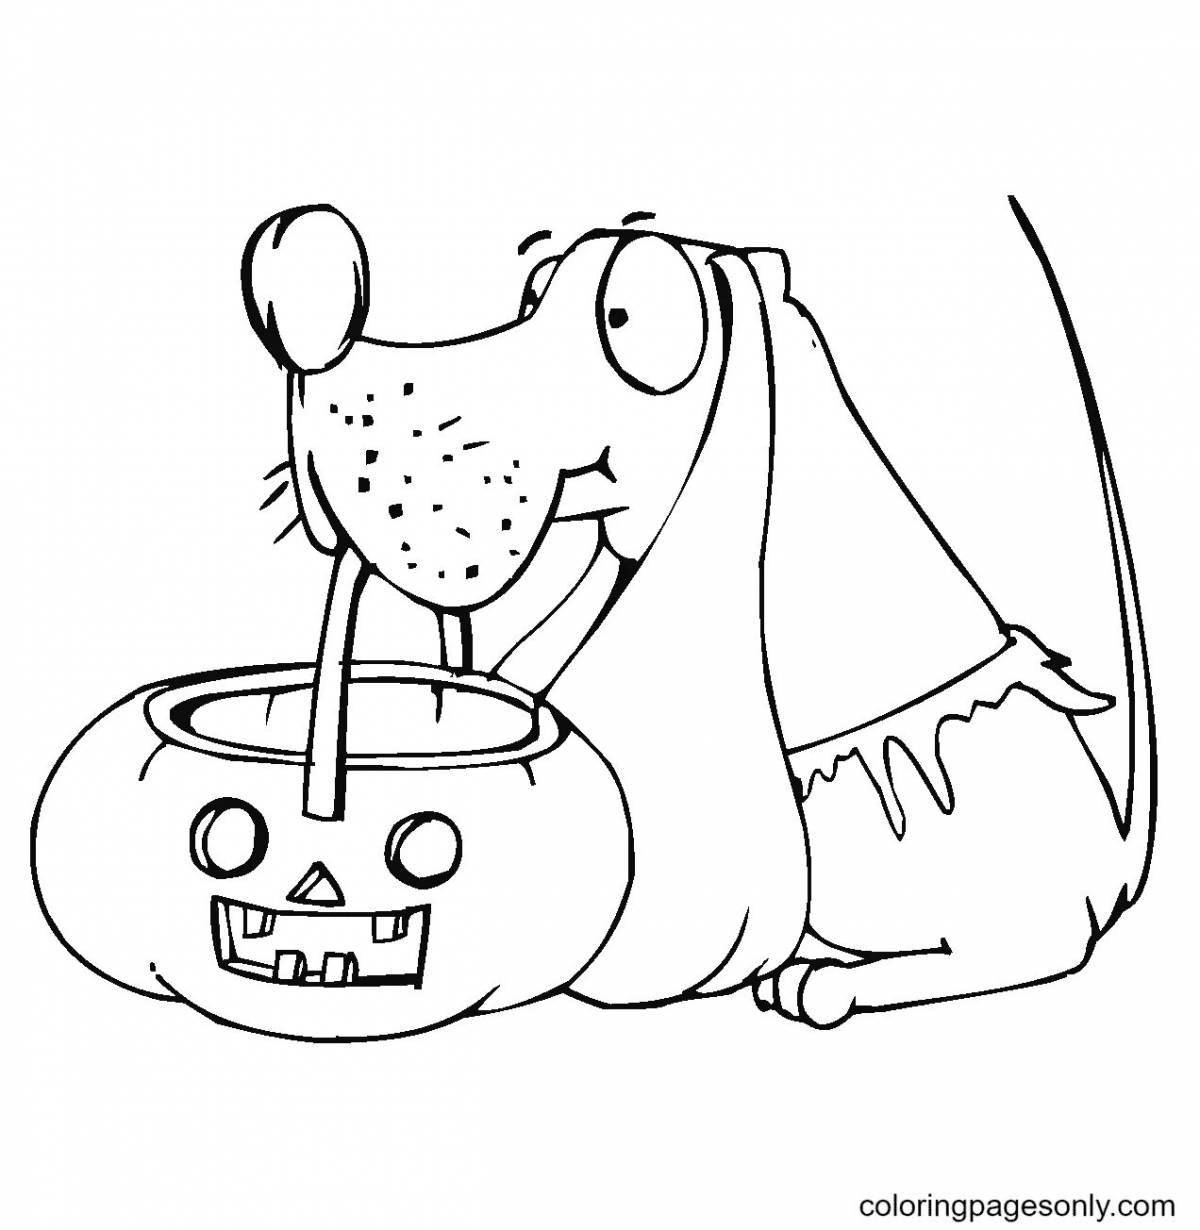 Adorable coloring book funny dogs